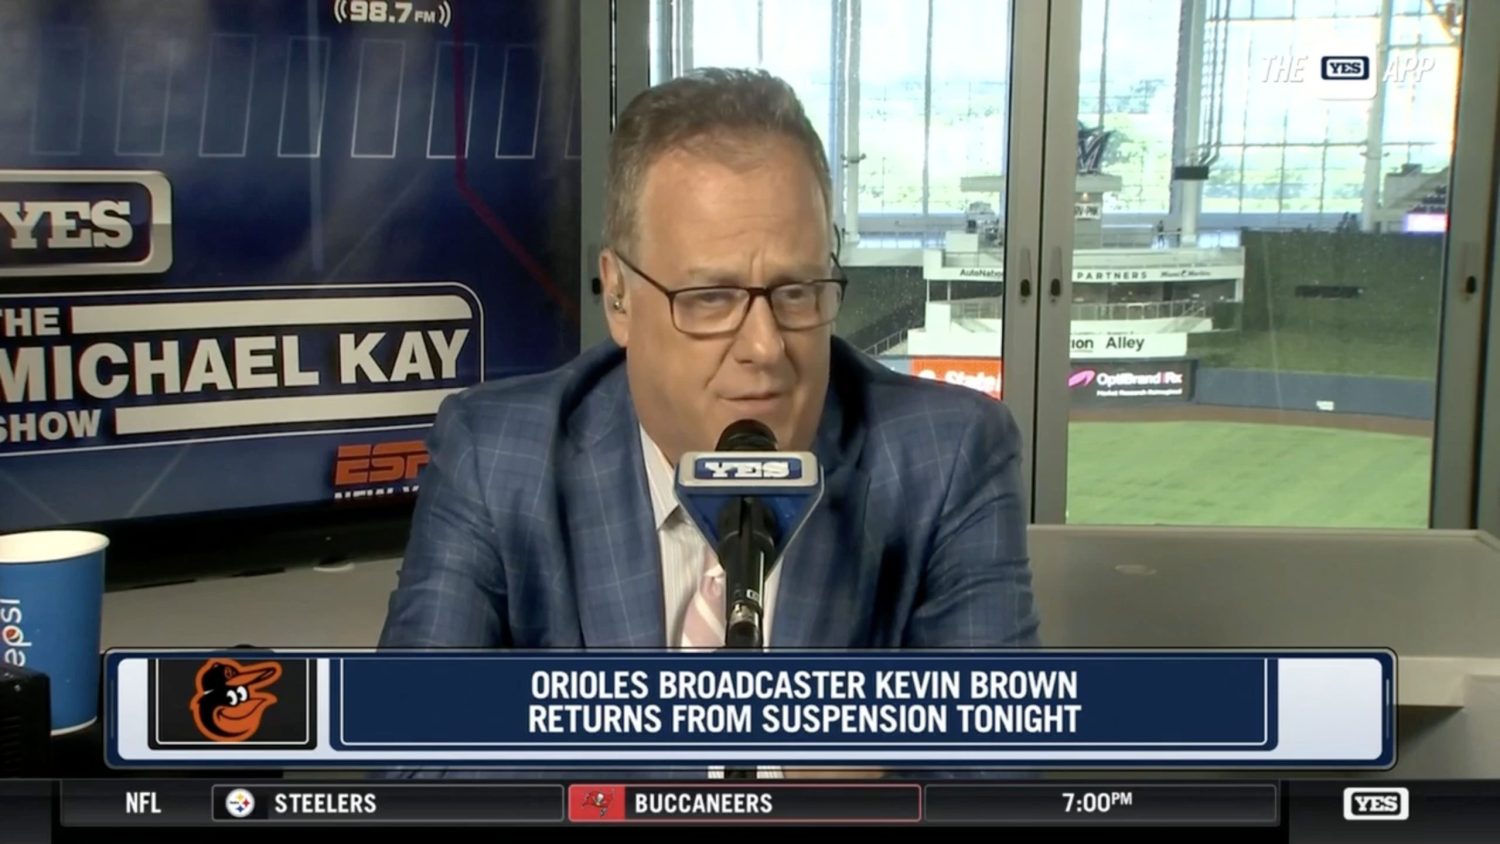 The Michael Kay Show on ESPN New York and YES